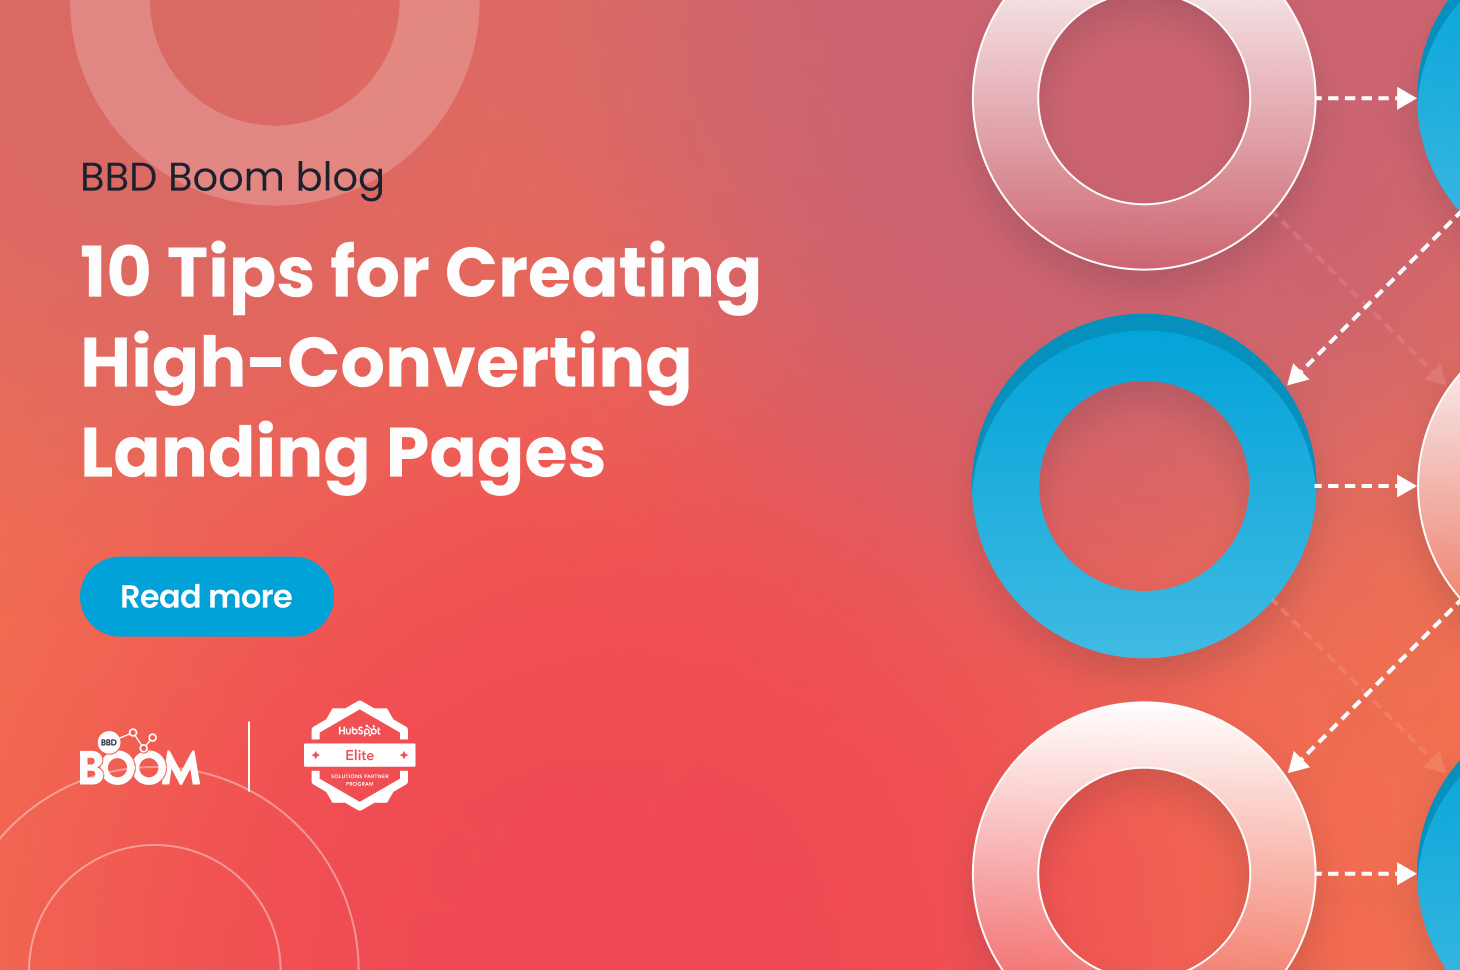 10 Expert Tips for Creating High-Converting Landing Pages